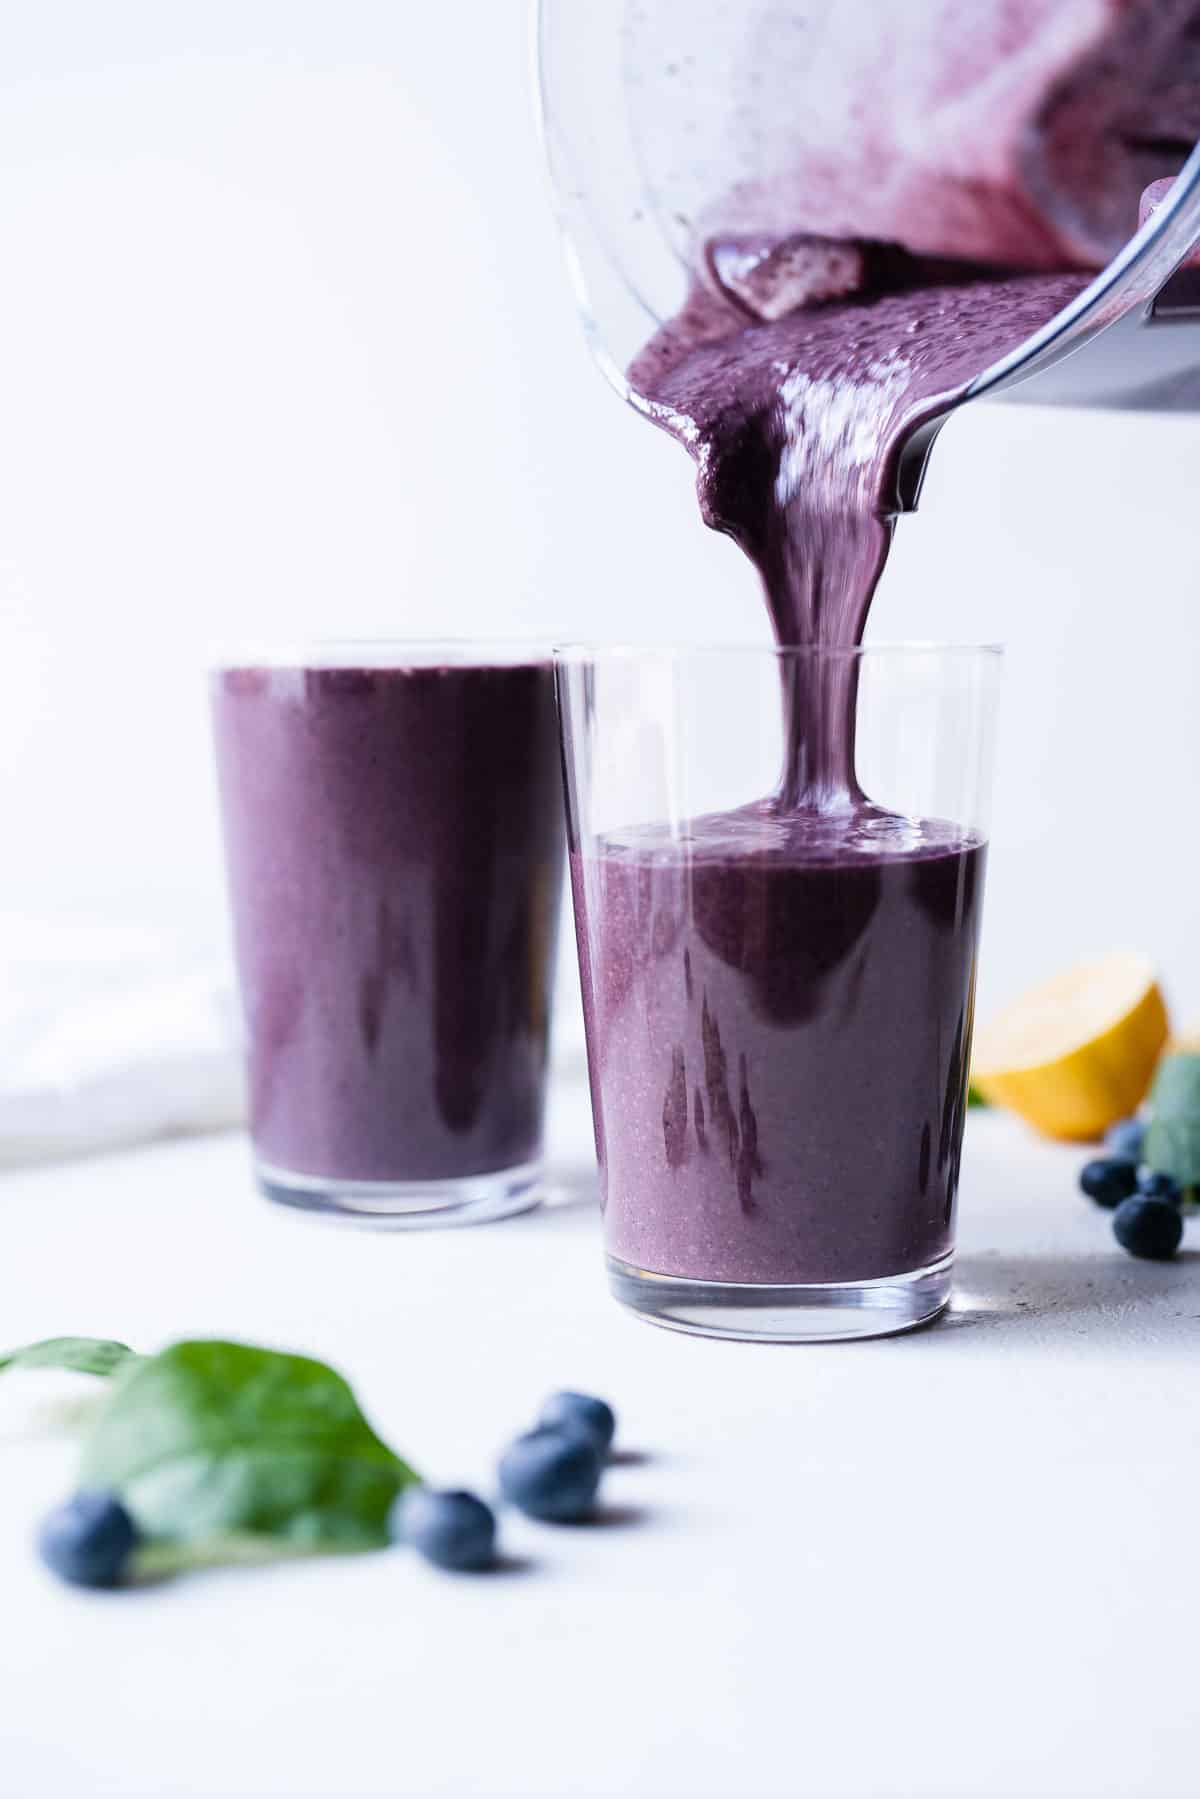 A blueberry spinach smoothie being poured into two clear glasses.